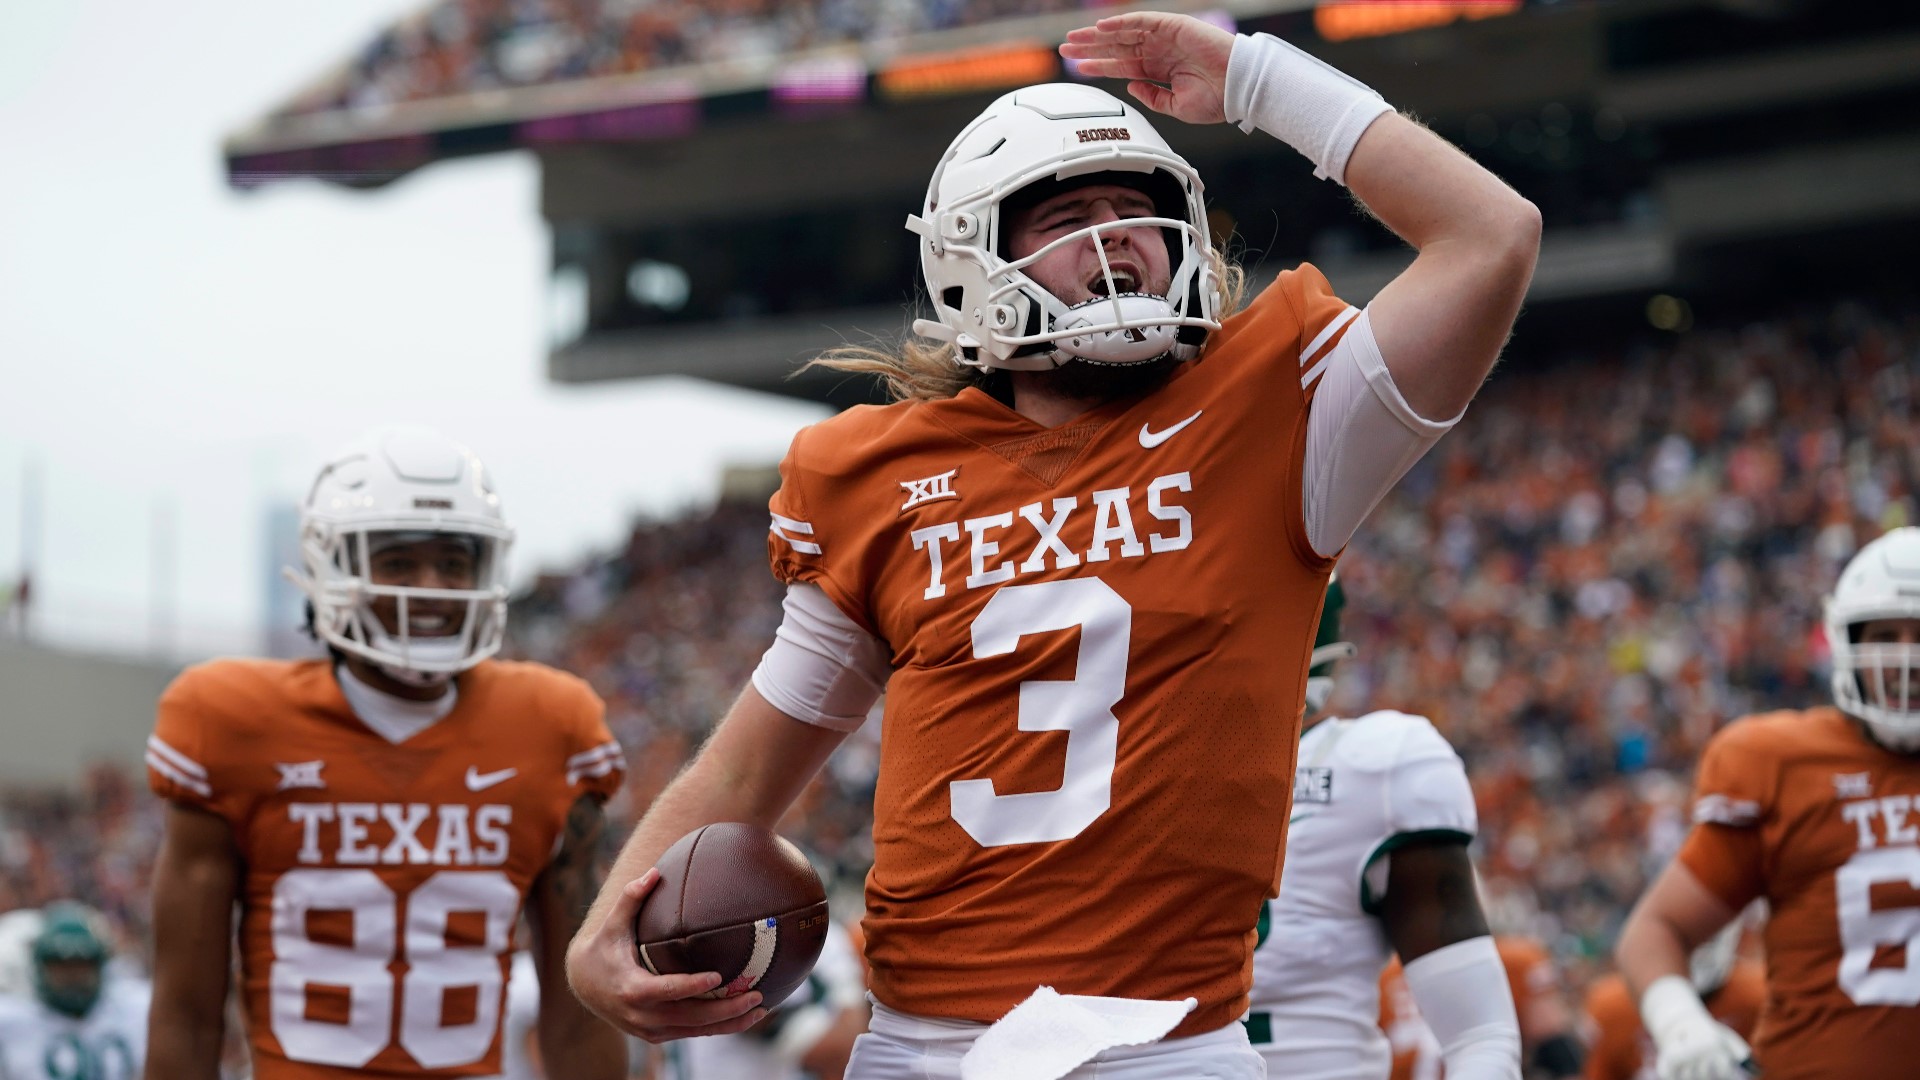 Texas now awaits a bowl assignment or, if Kansas can manage to beat its rival, prepares to face TCU in the Big 12 championship game on Dec. 3.